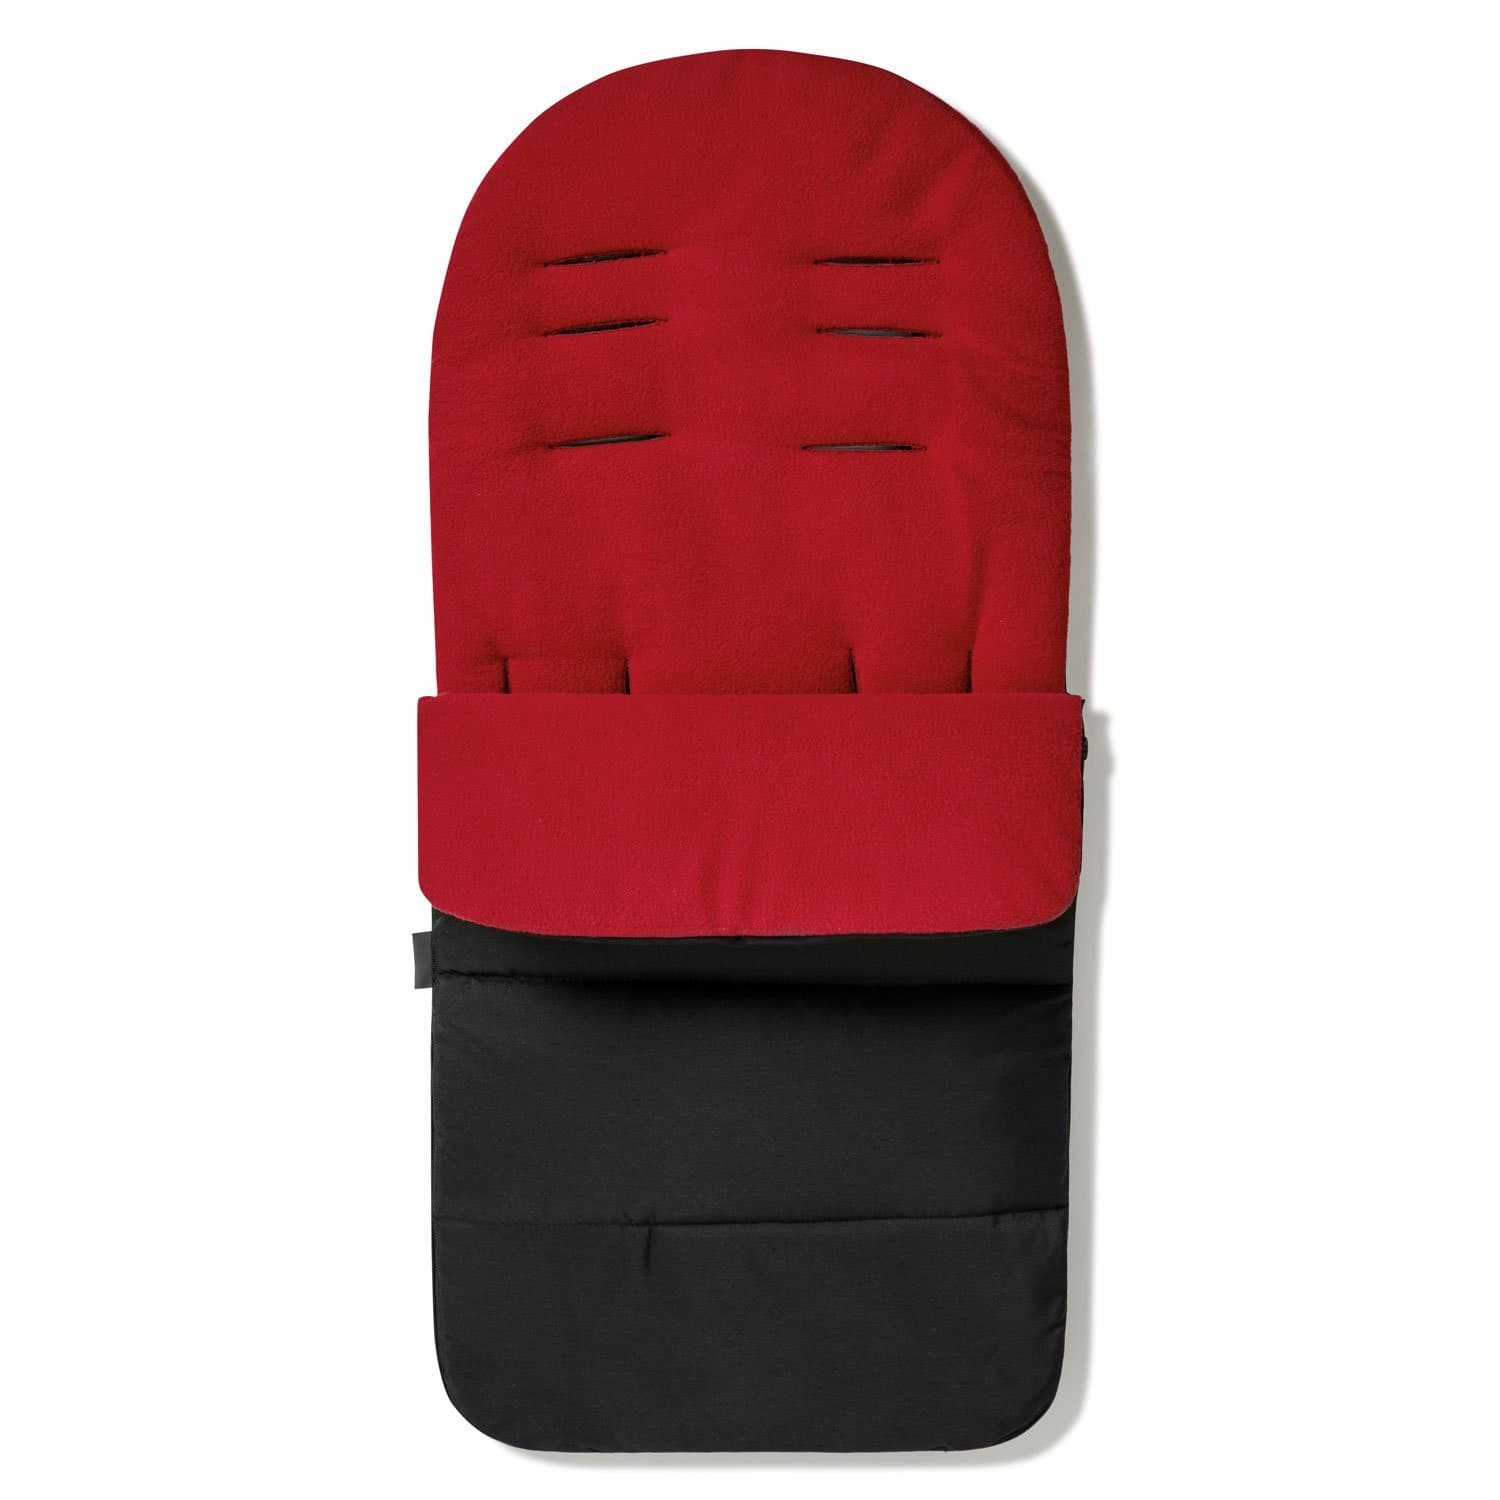 Premium Footmuff / Cosy Toes Compatible with Baby Elegance - For Your Little One